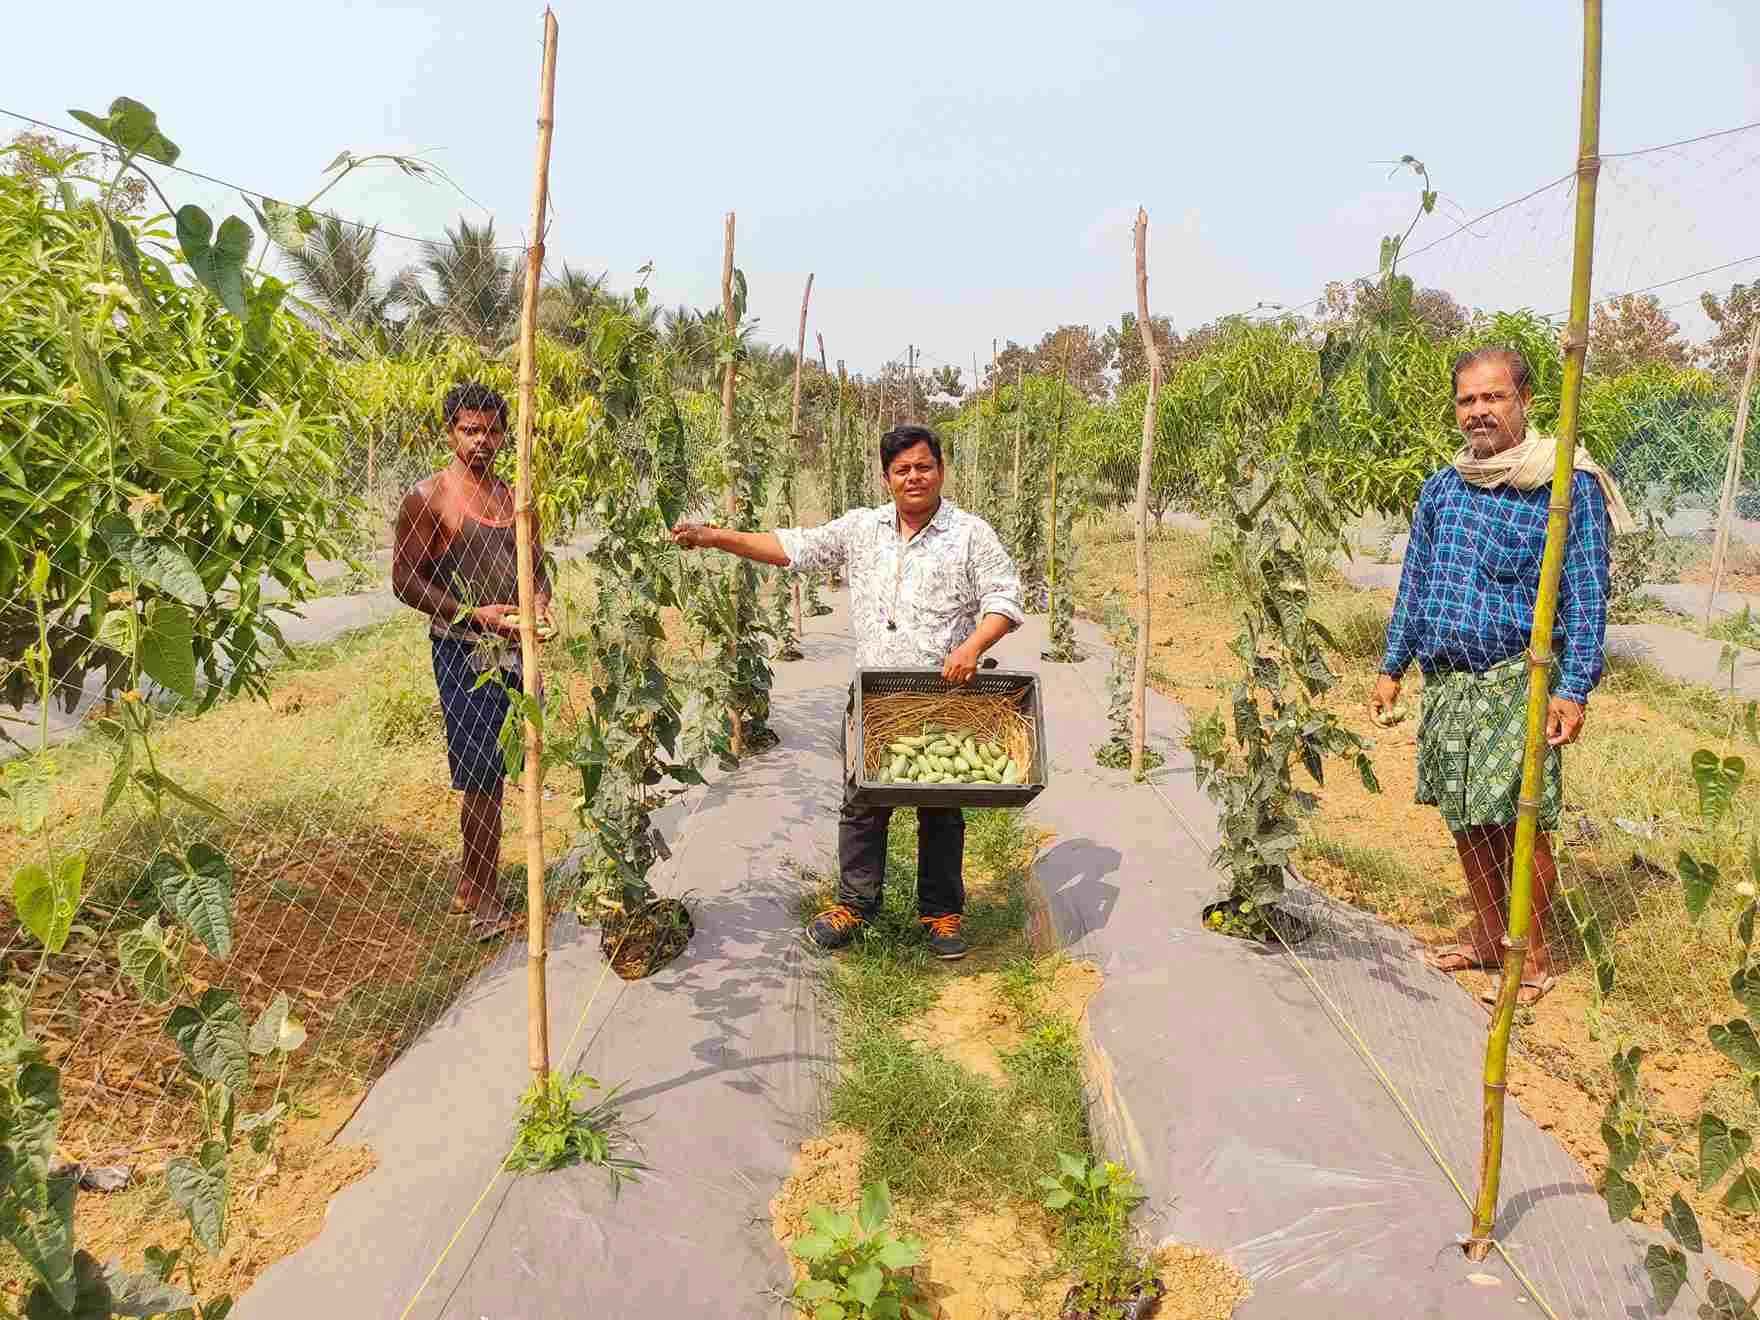 Villa Mart works with farmers across Odisha to bring fresh produce grown on their fields to consumers,